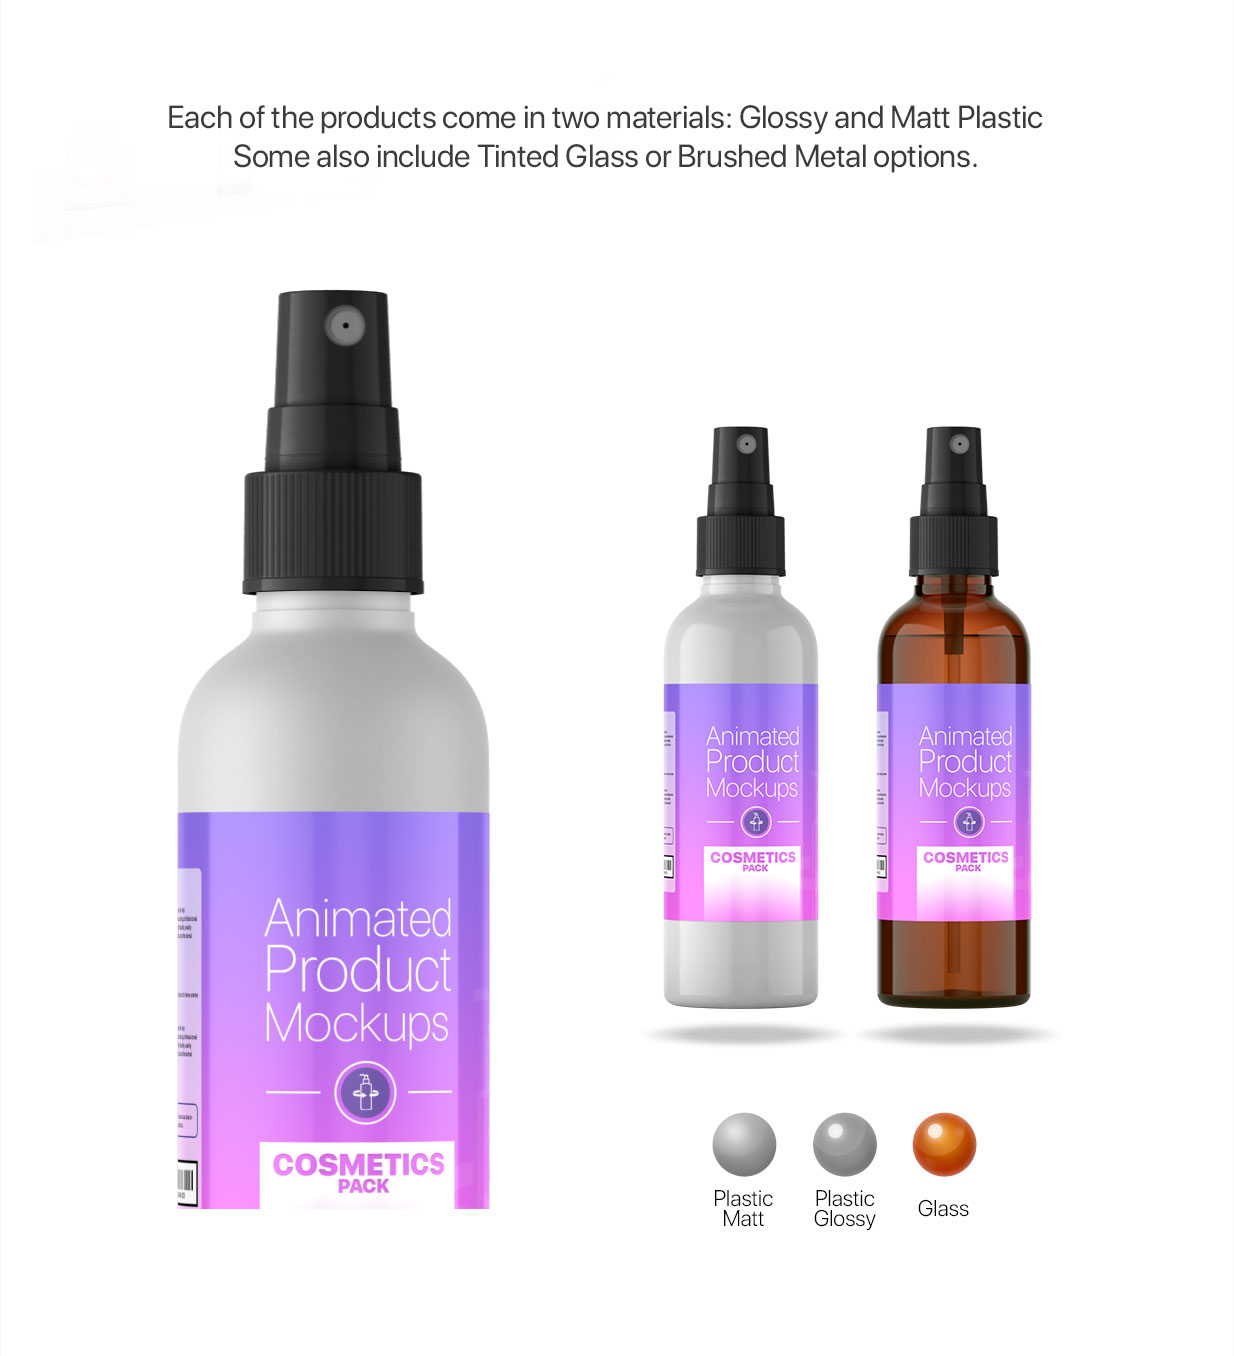 Animated Product Mockups - Cosmetics Pack - 4